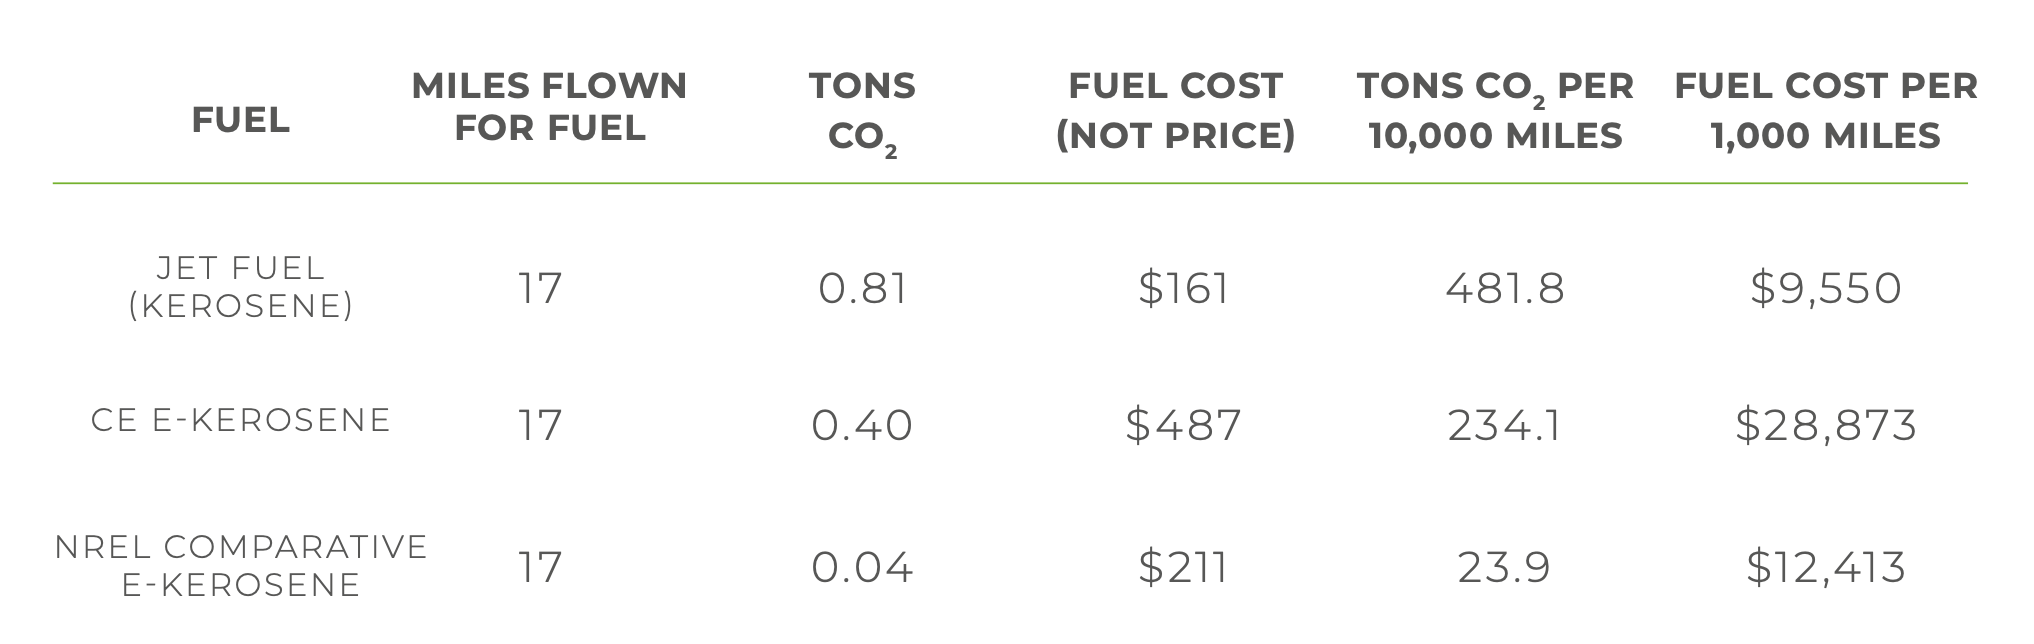 Table from Carbon Engineering synthetic fuel case study by author